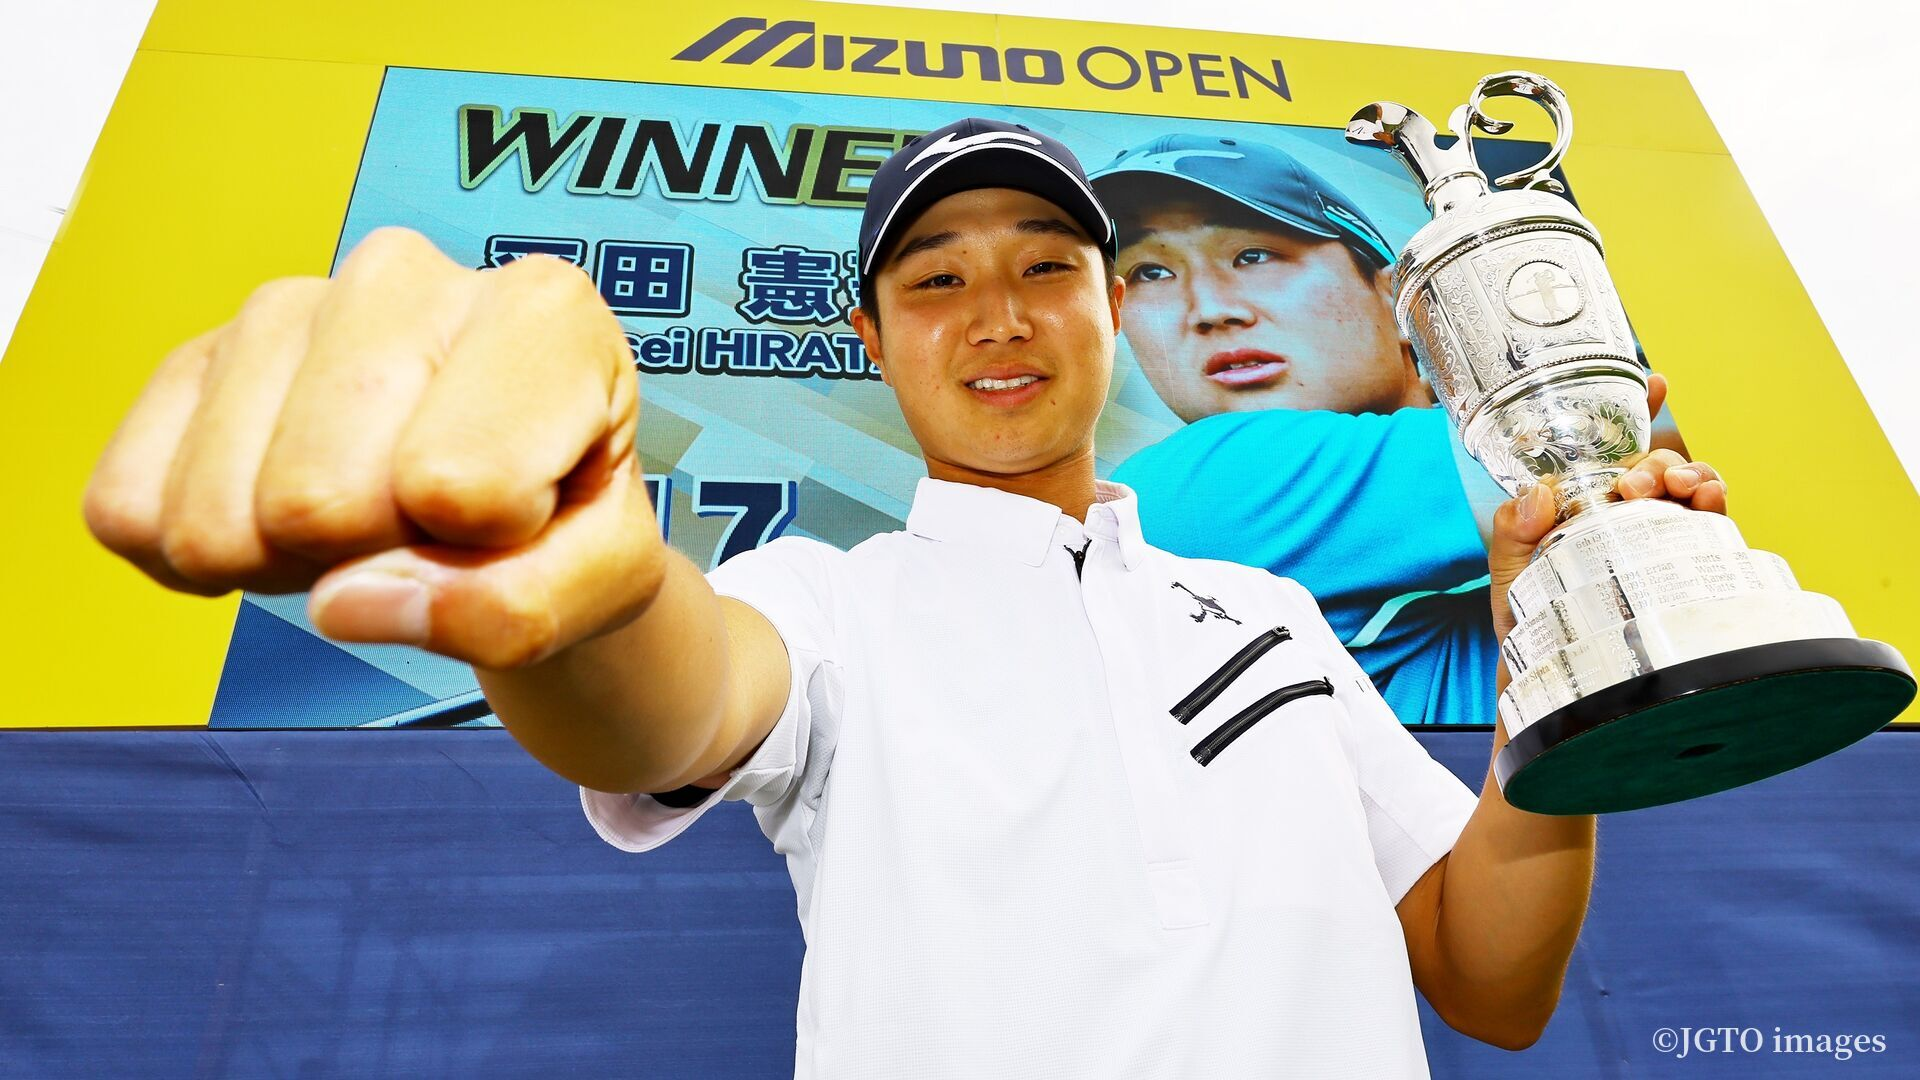 Hirata pulls off a sensational victory to become the Tour’s 400th first-time winner